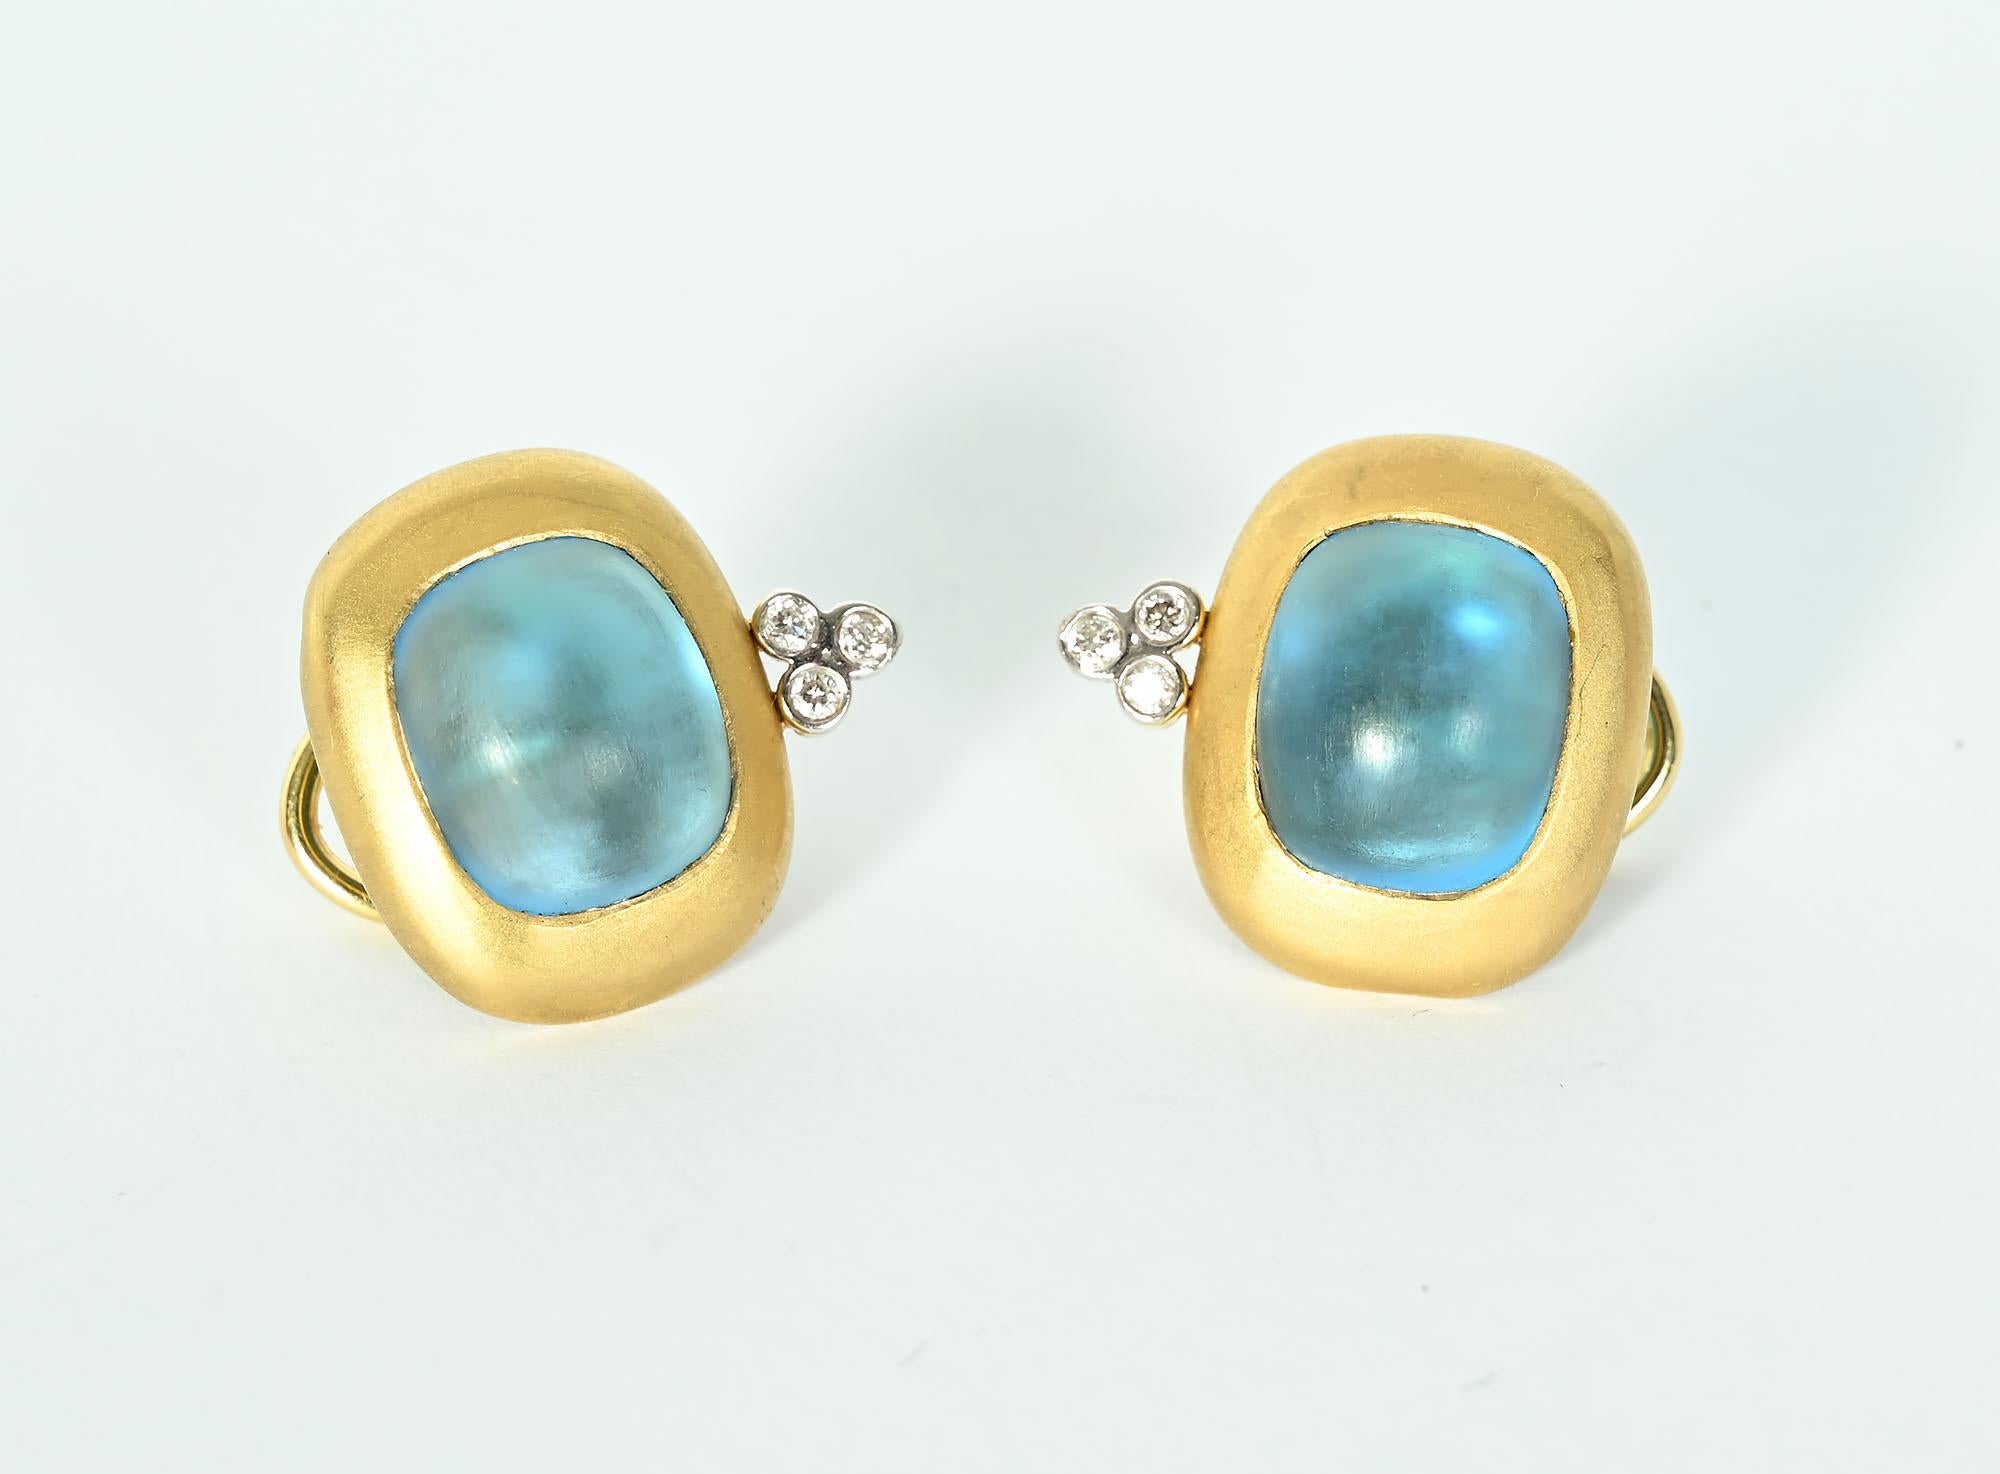 Colorful blue glass earrings with three diamonds below. The top part of the earring measures 3/4